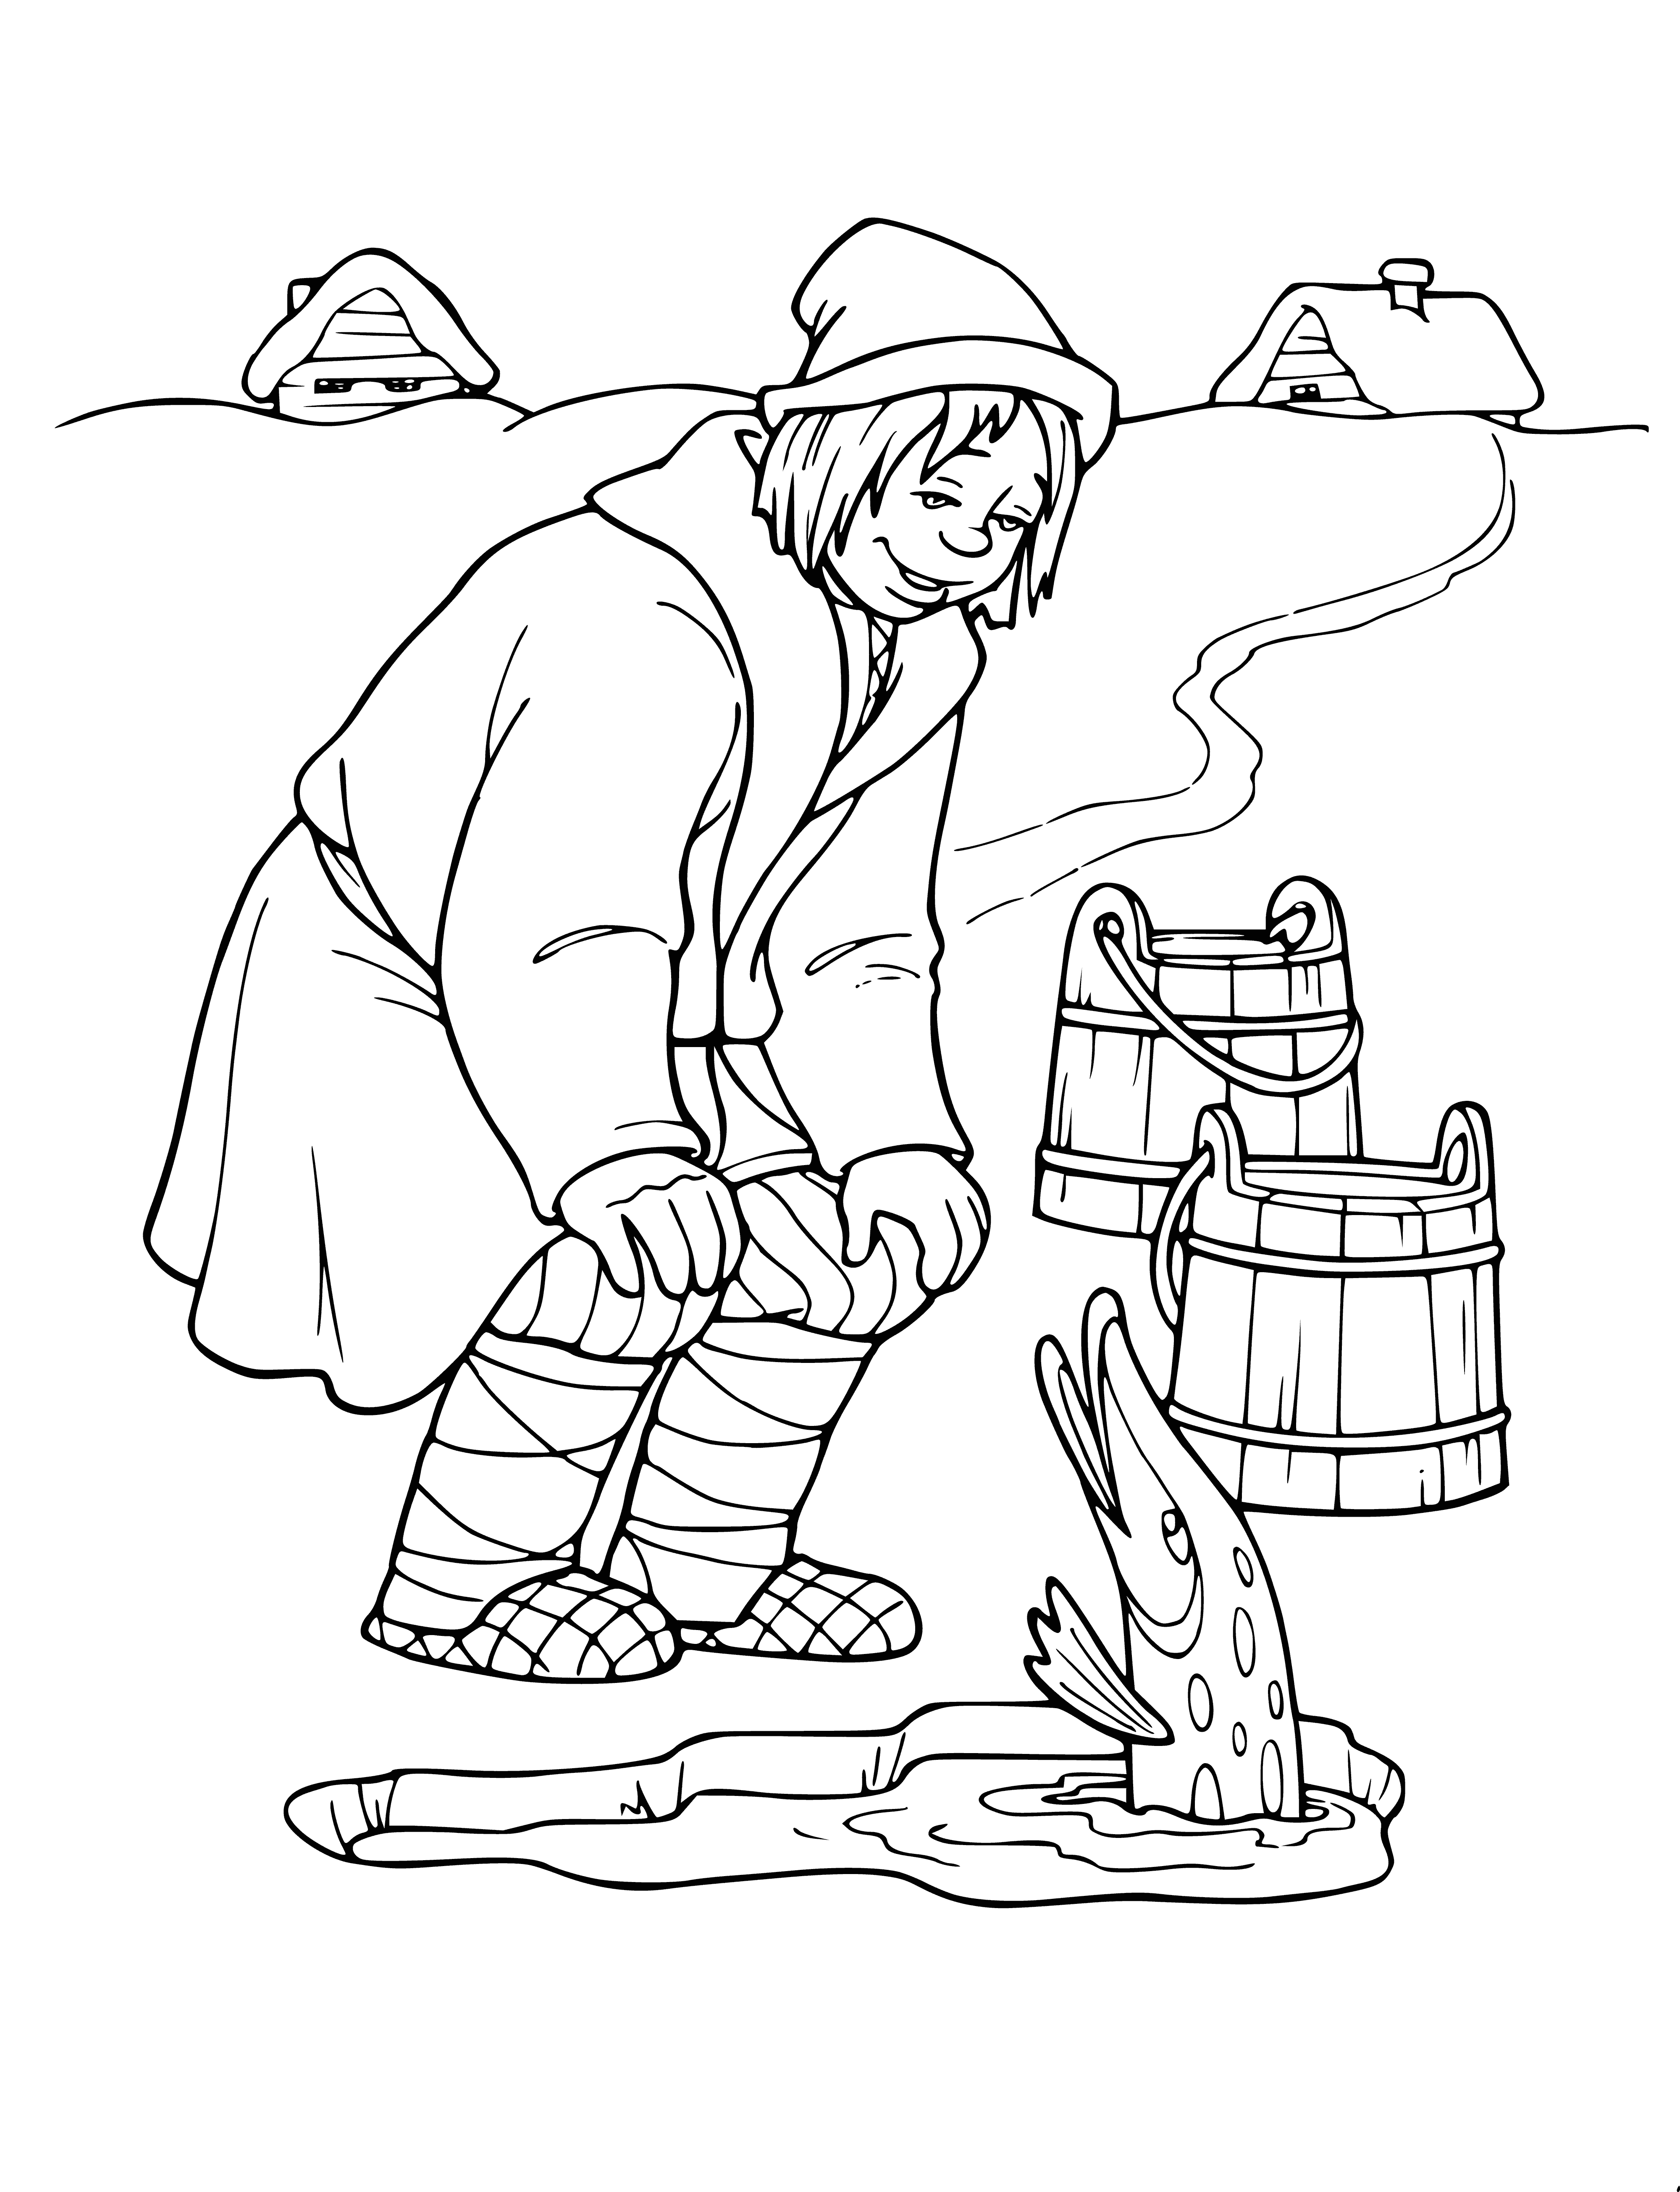 Emelya and pike coloring page